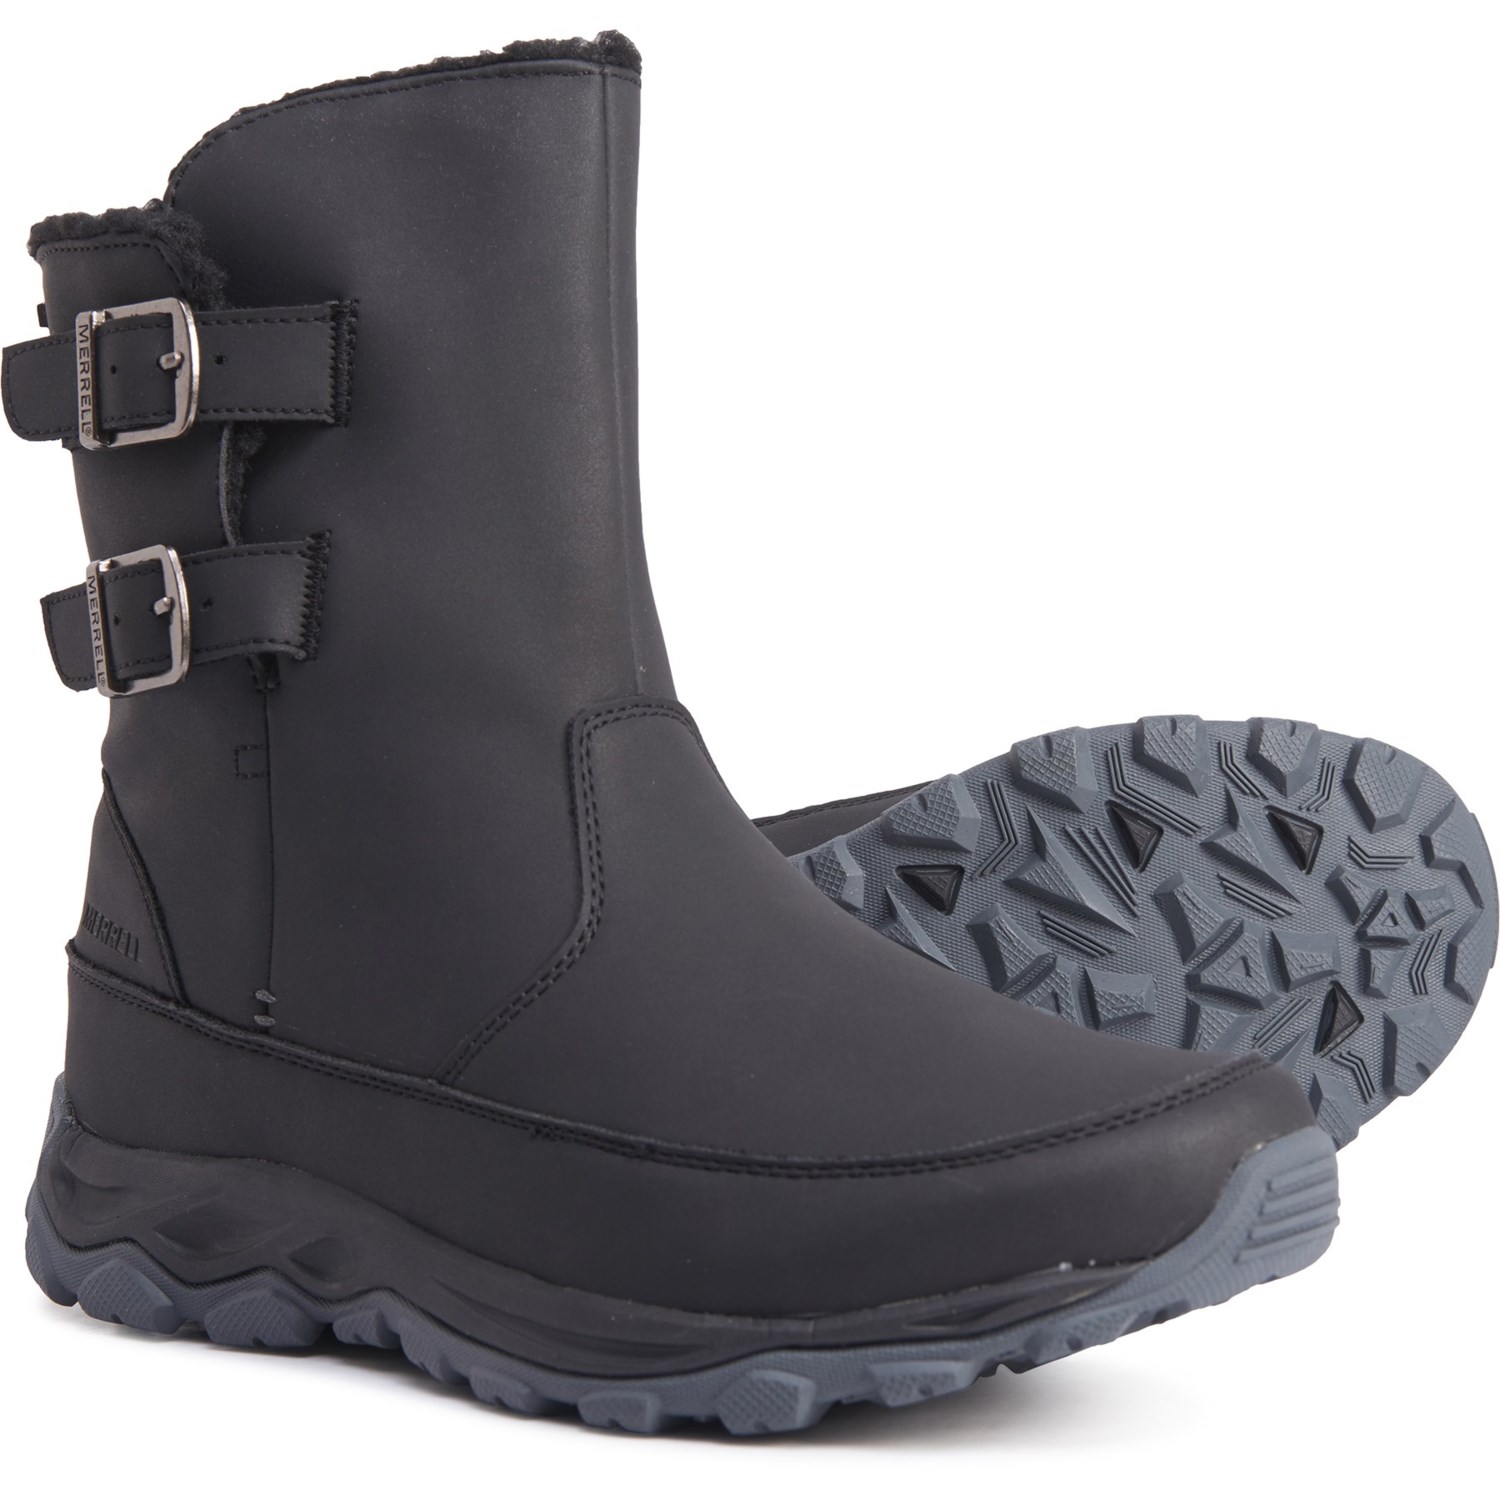 womens black buckle boots